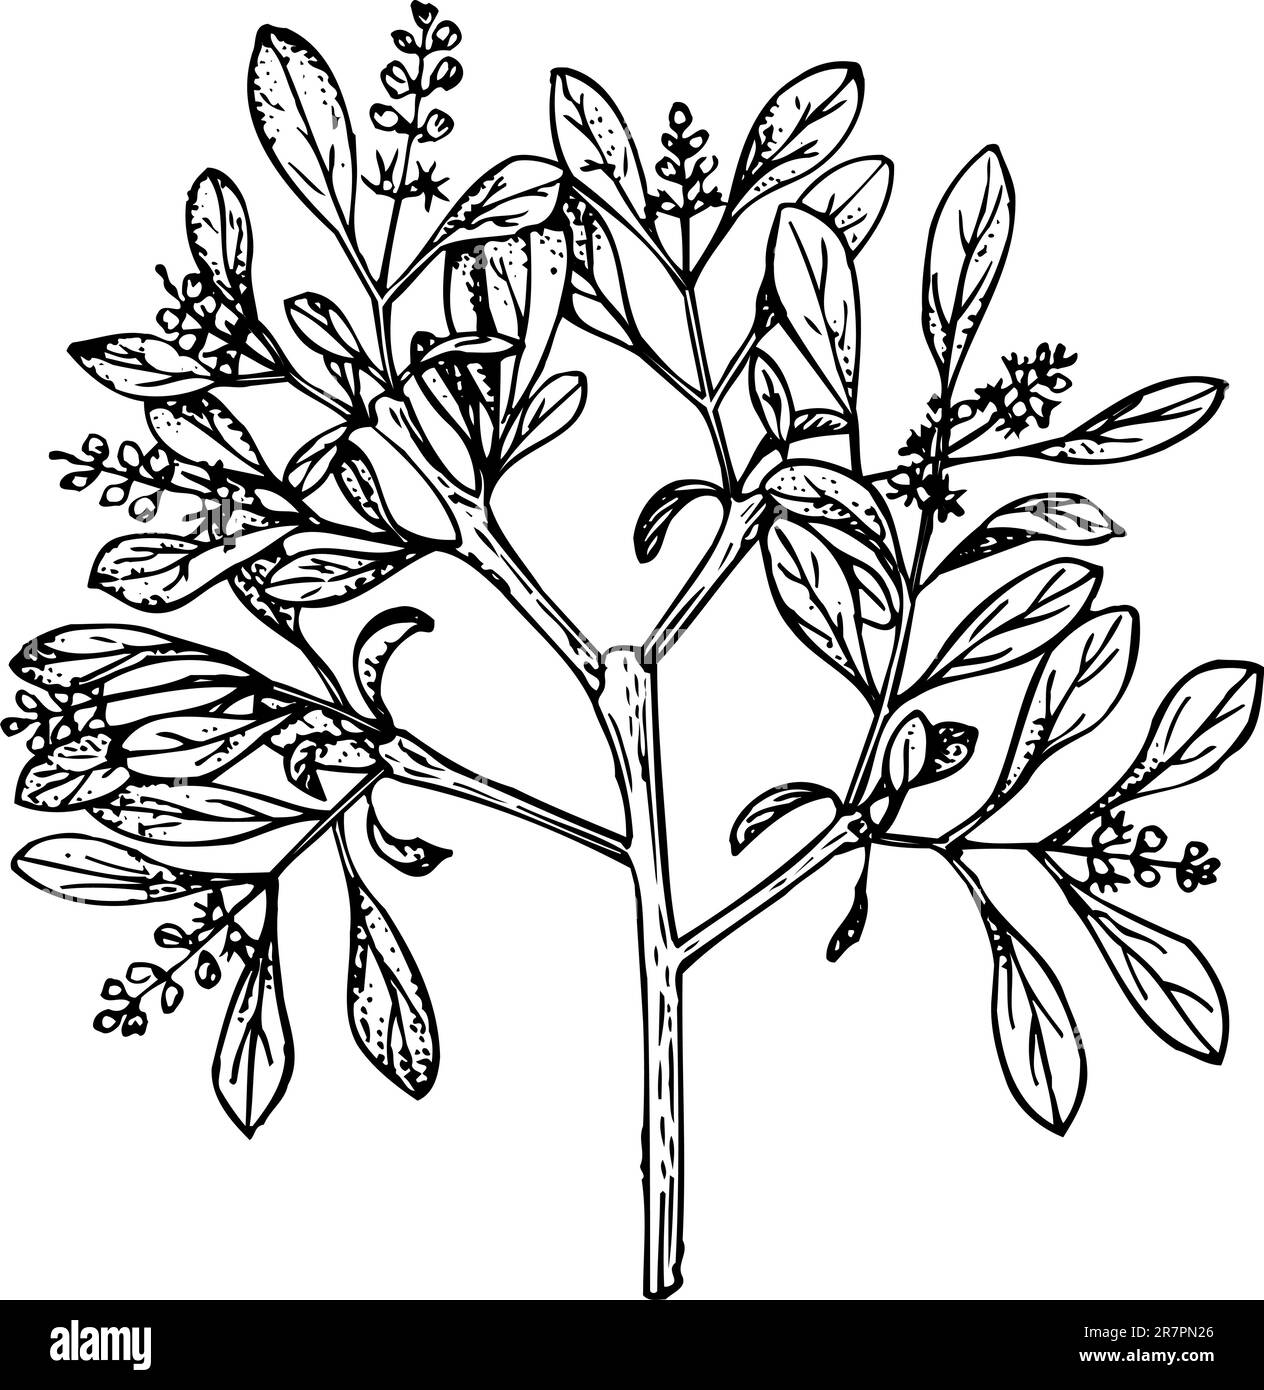 Plant loranthus isolated on white Stock Vector